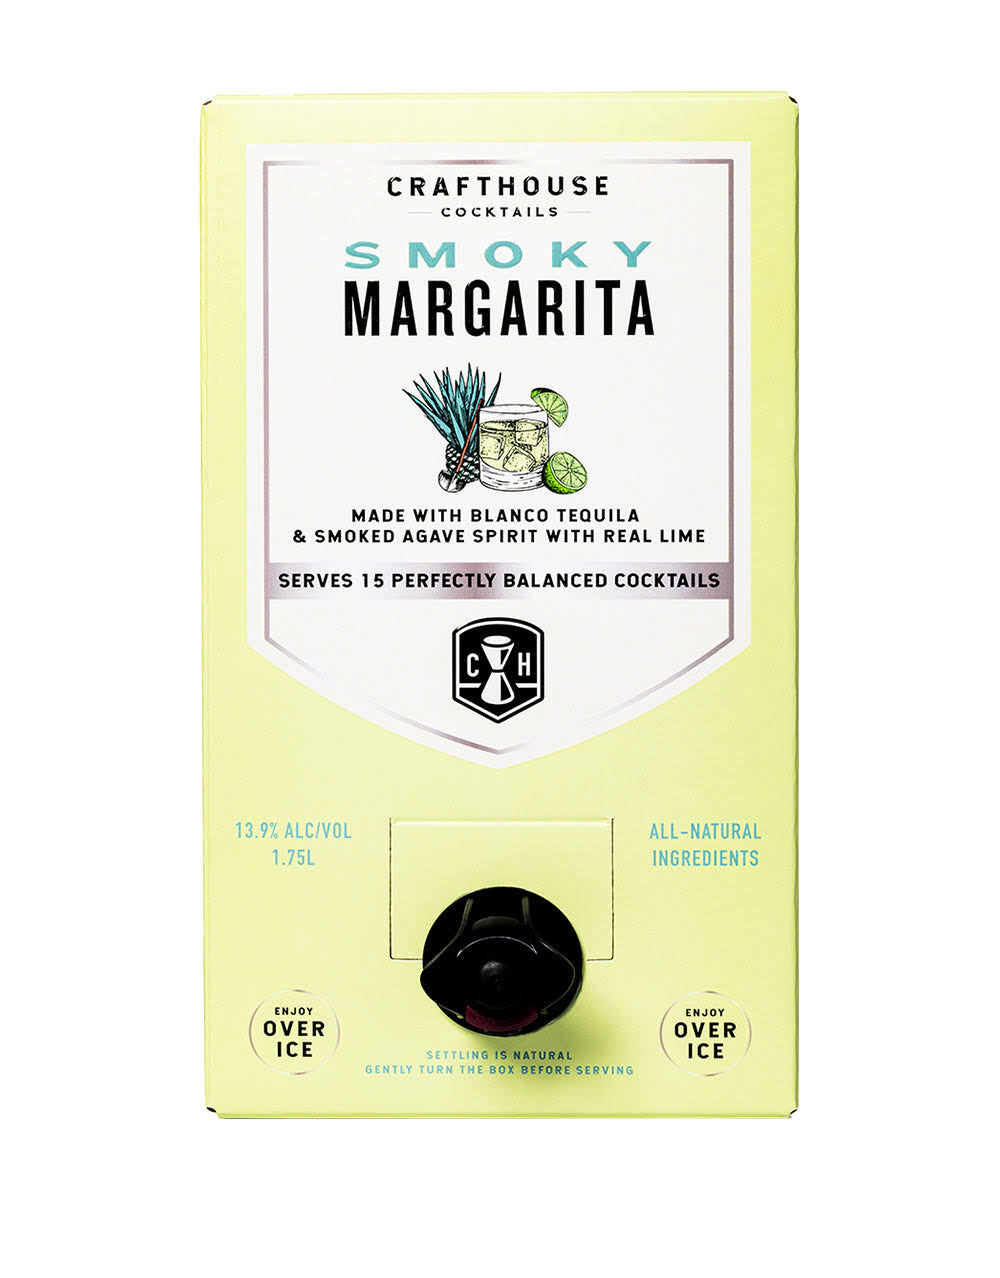 Crafthouse Cocktails Smoky Margarita (1.75L)